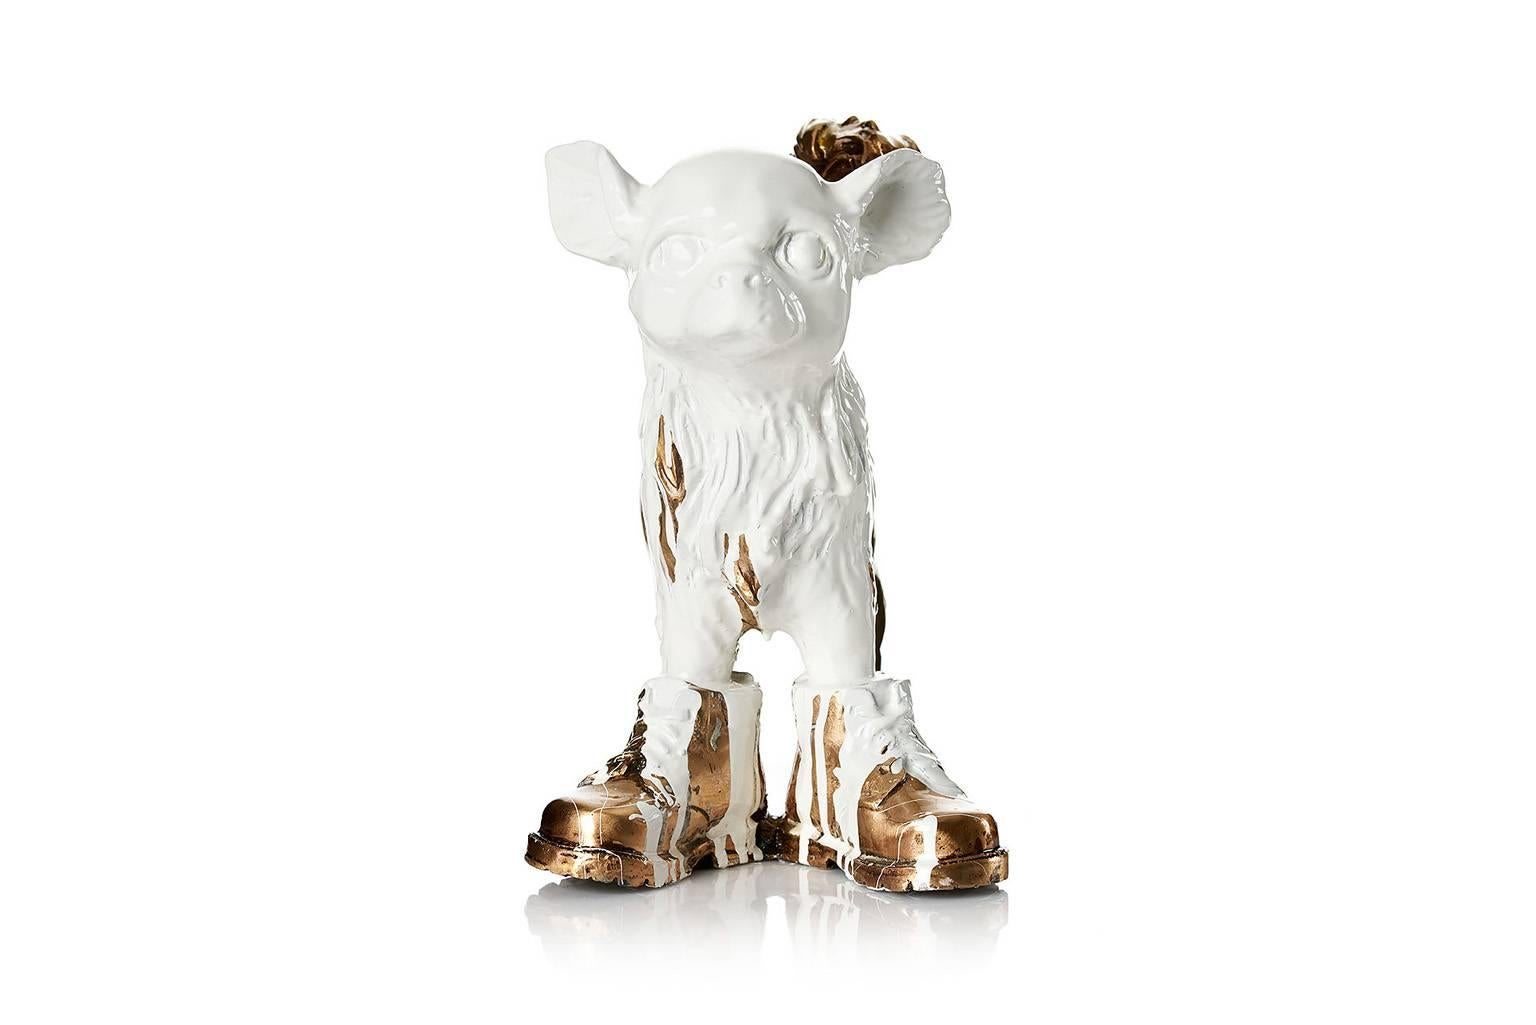 Cloned Chihuahua  - Gold Figurative Sculpture by William Sweetlove